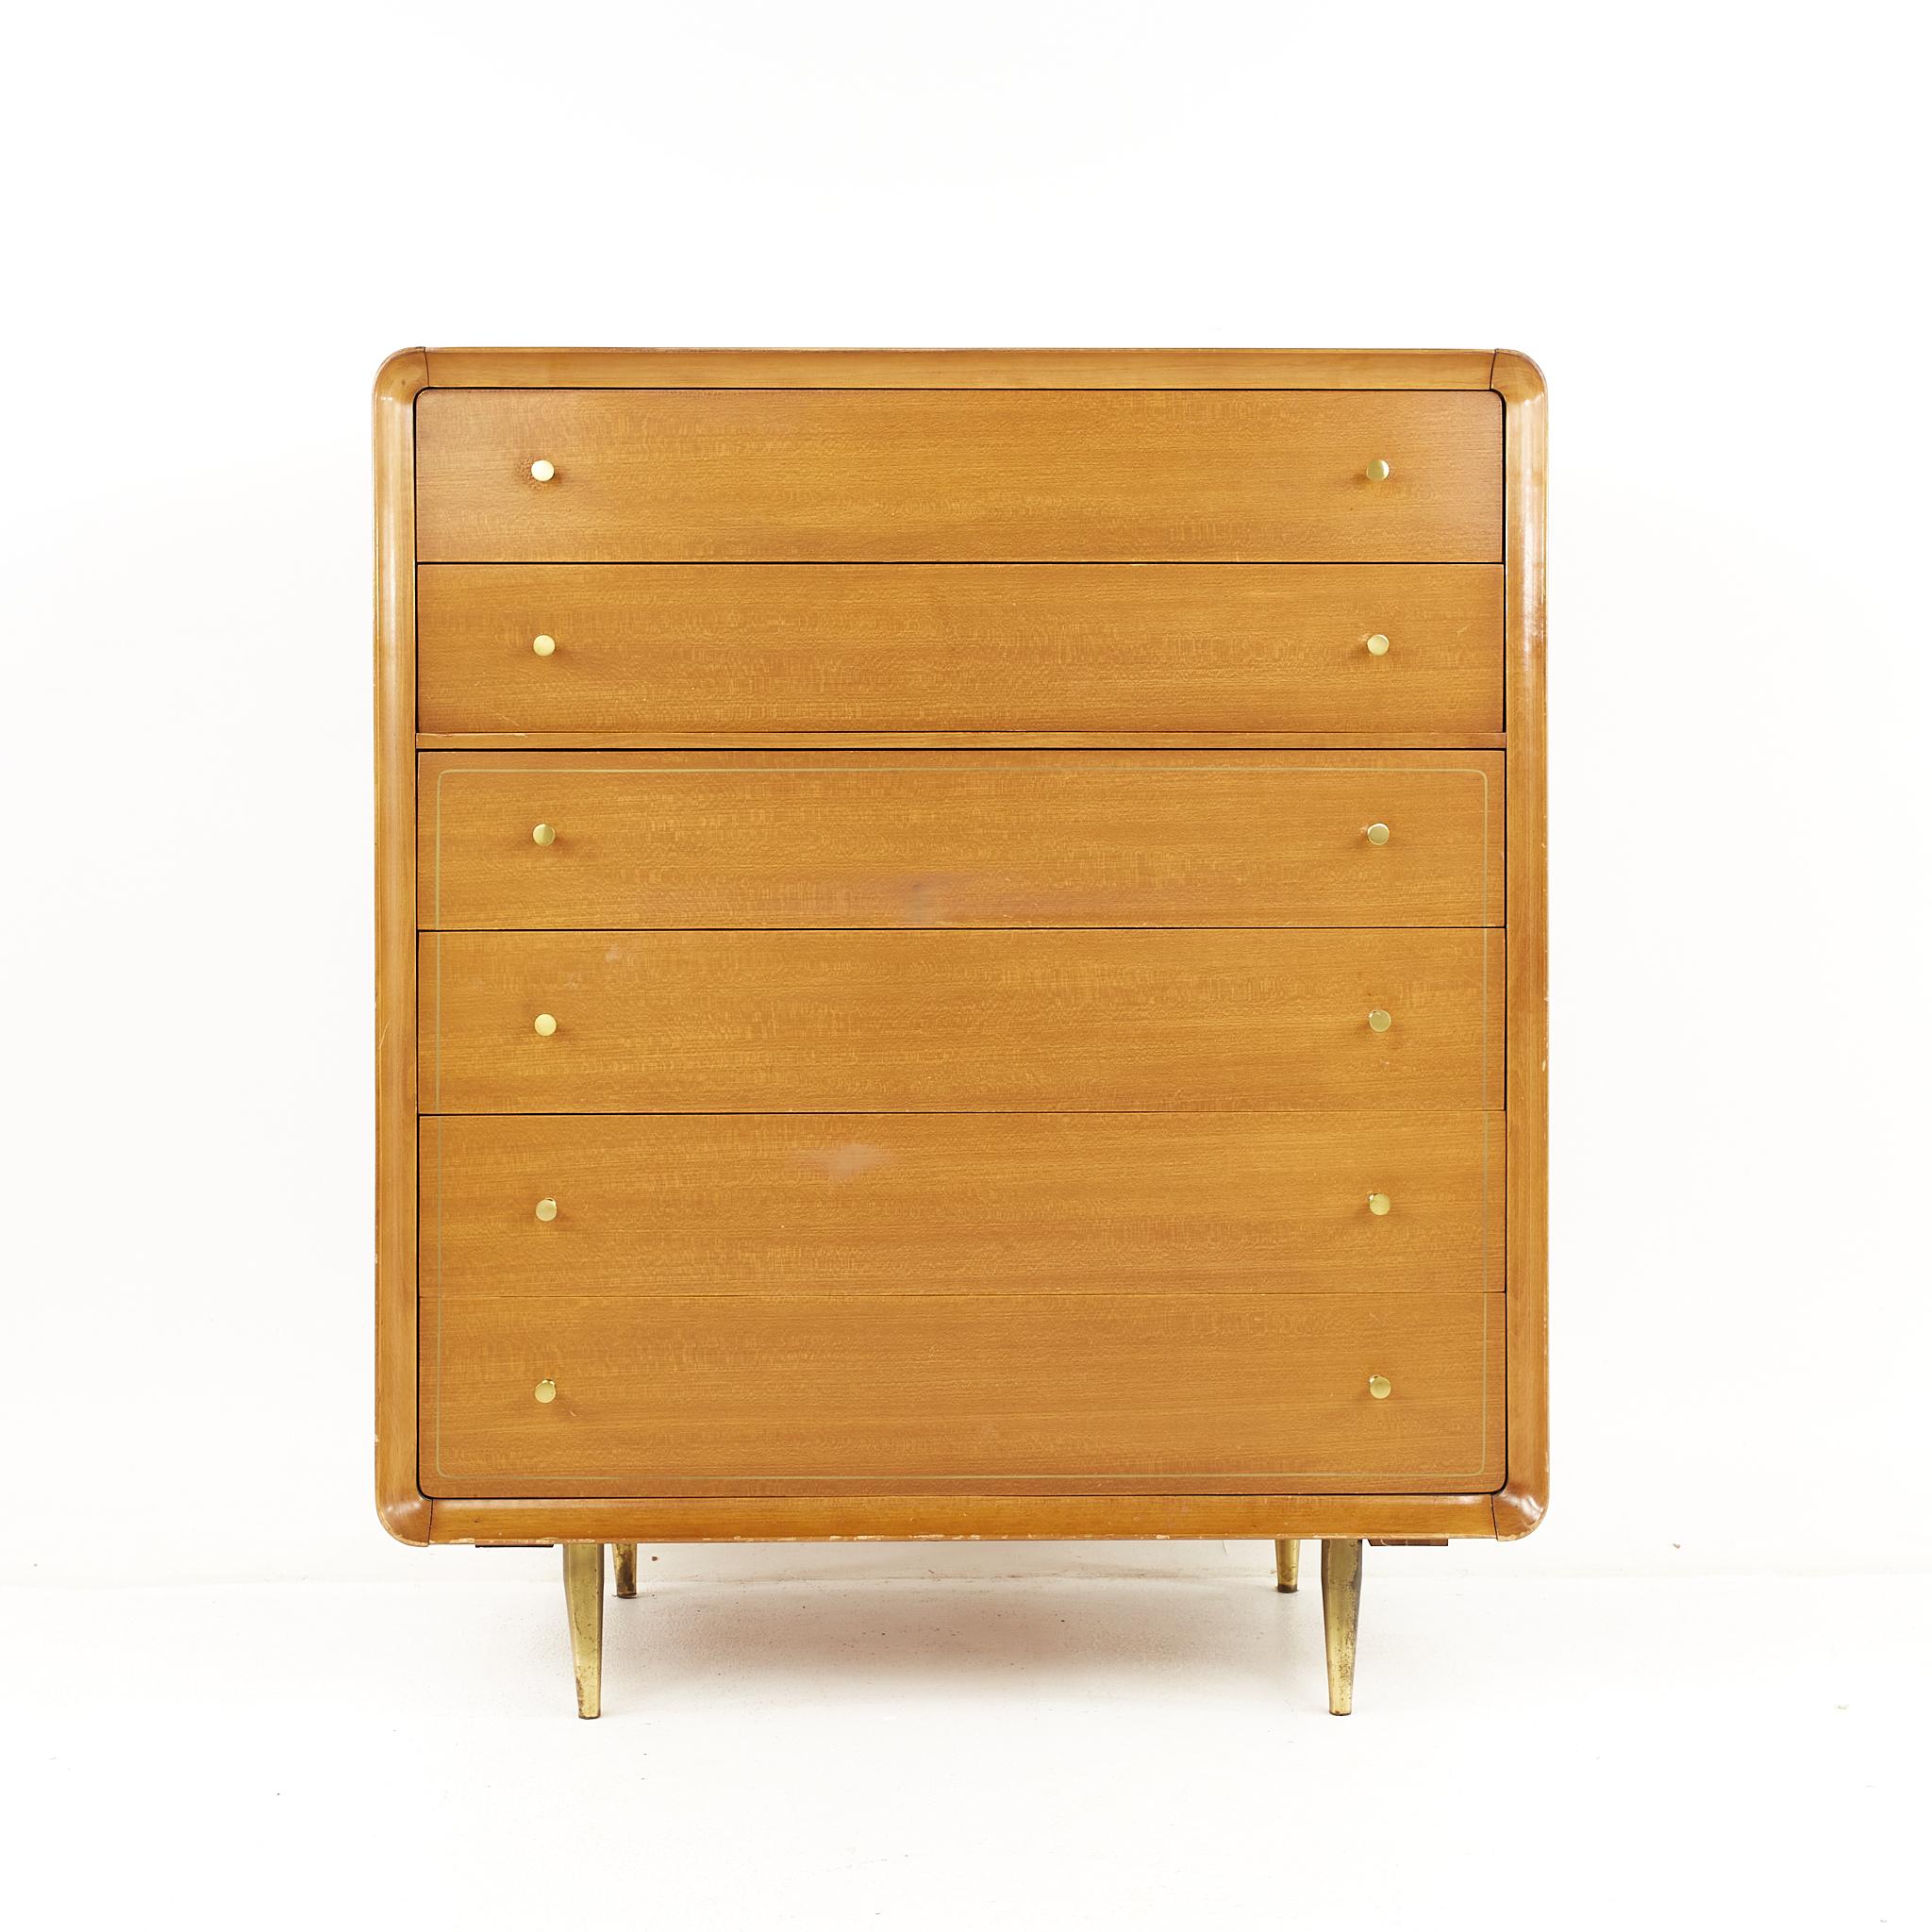 Cavalier mid century walnut and brass 6 drawer highboy dresser

The dresser measures: 38 wide x 20 deep x 45 inches high

All pieces of furniture can be had in what we call restored vintage condition. That means the piece is restored upon